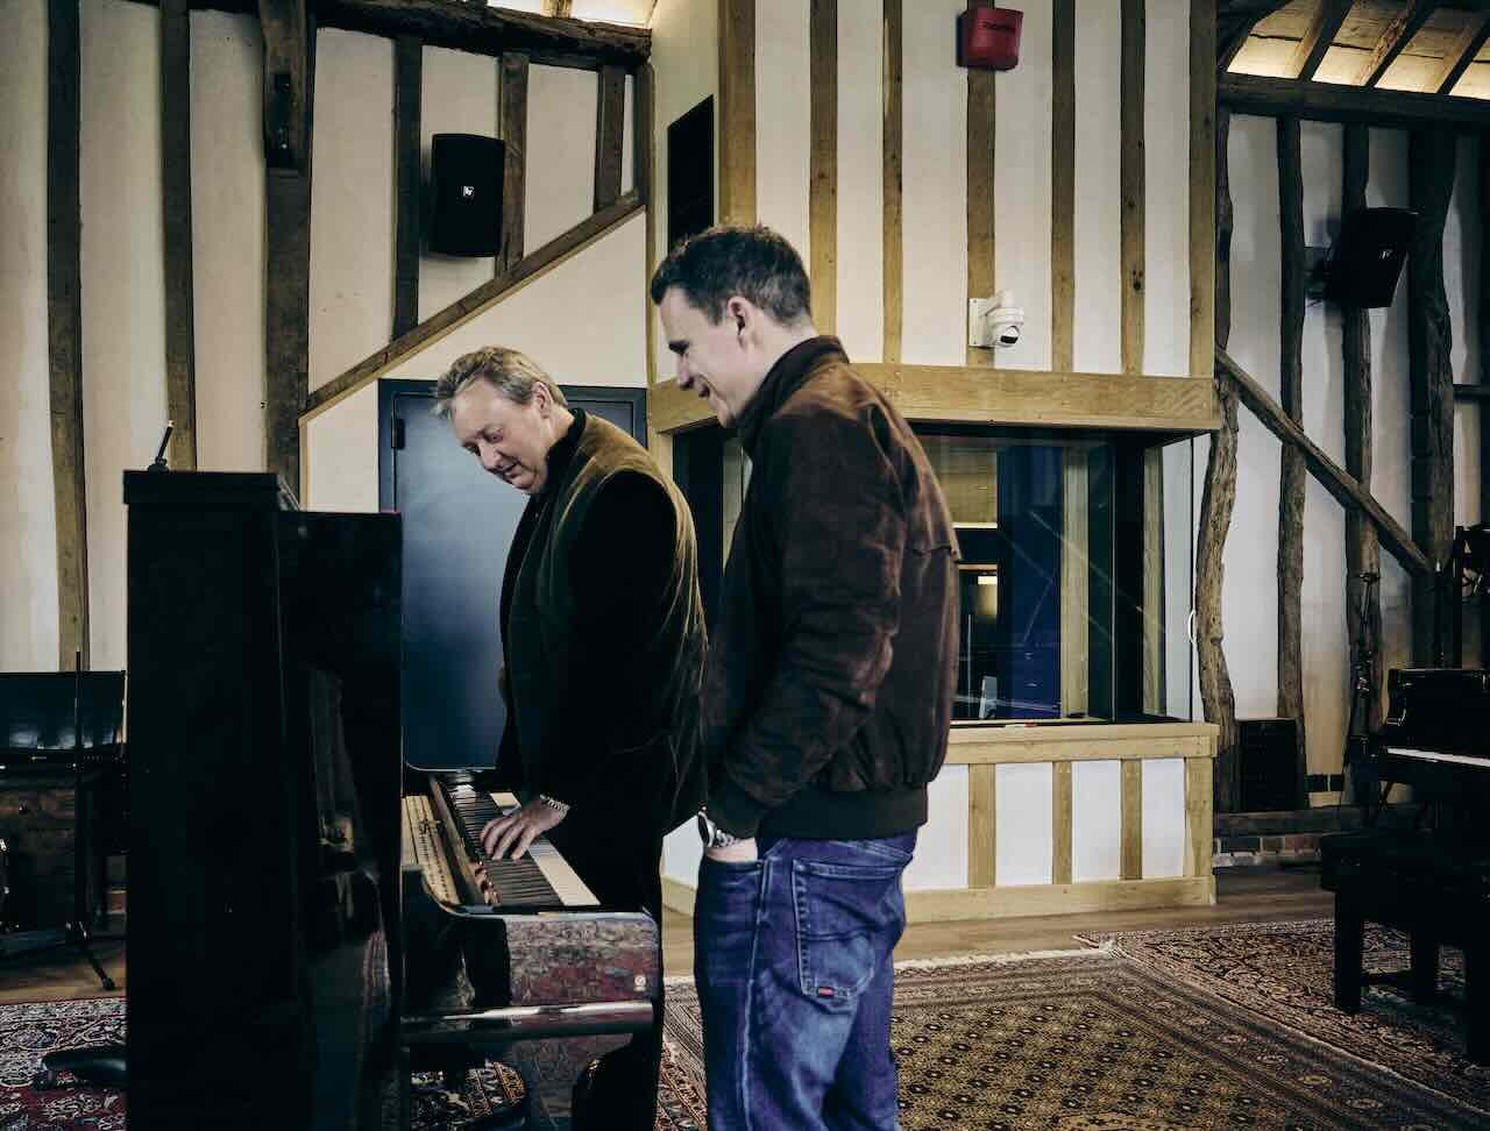 Andrew Sunnucks (L) and pianist Ben Andrew (R) setting up the Yamaha Piano